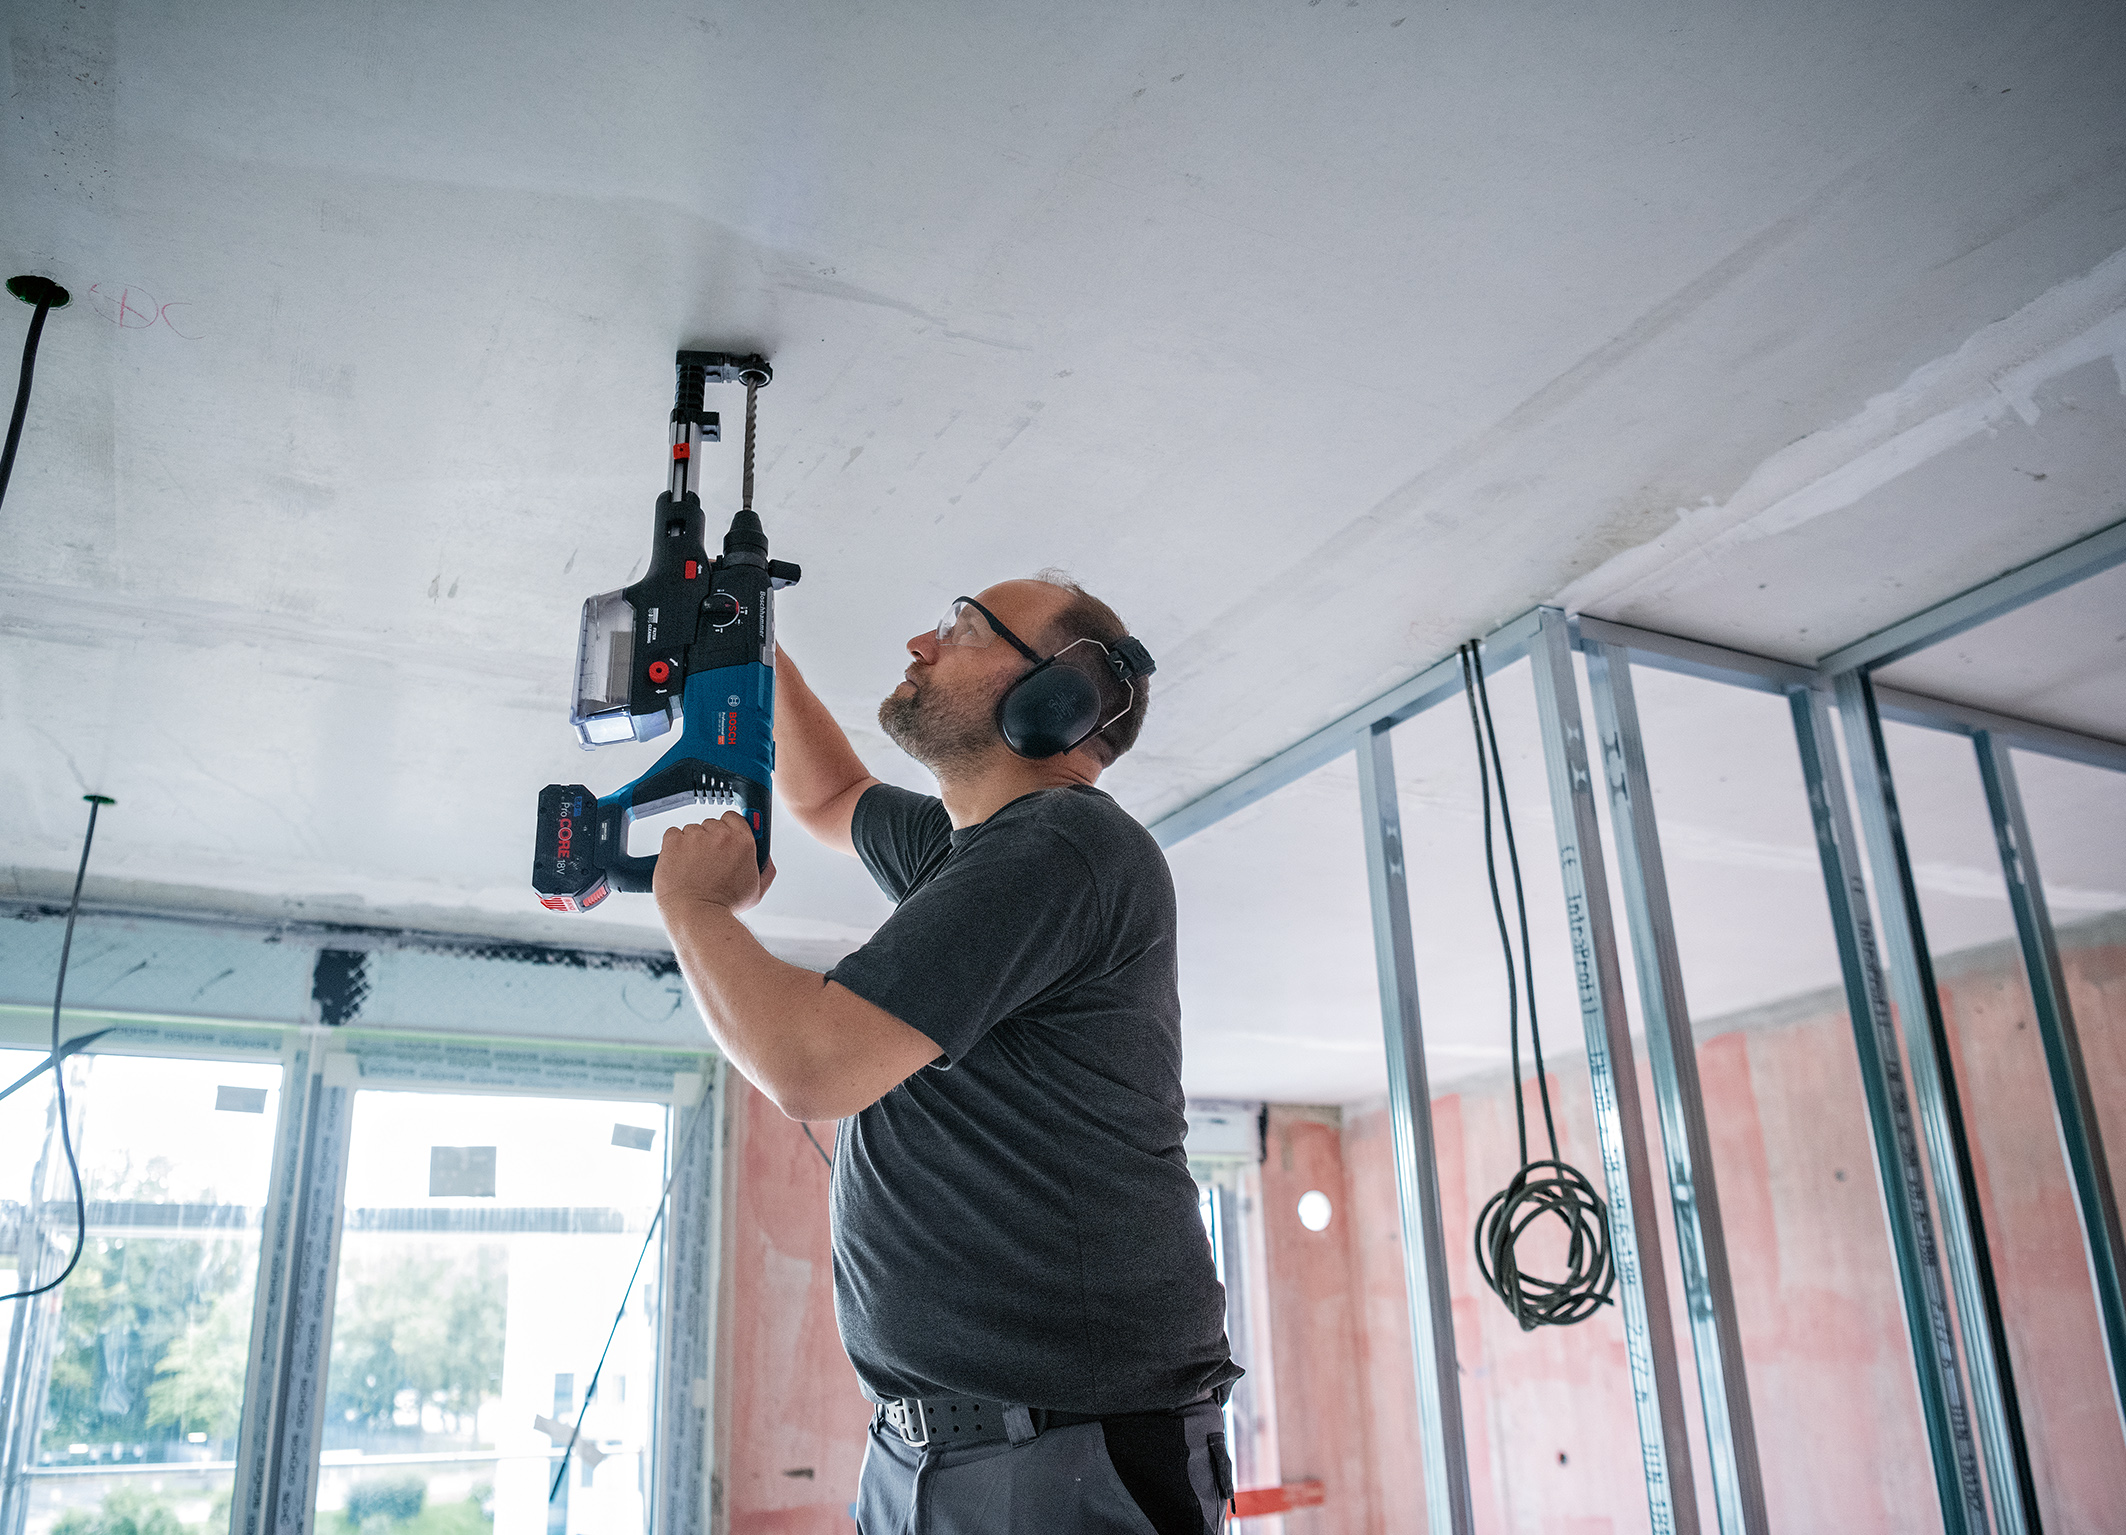 Dust-free drilling thanks to innovative dust extraction: Bosch GBH 18V-28 DC Professional 18V rotary hammer for professionals